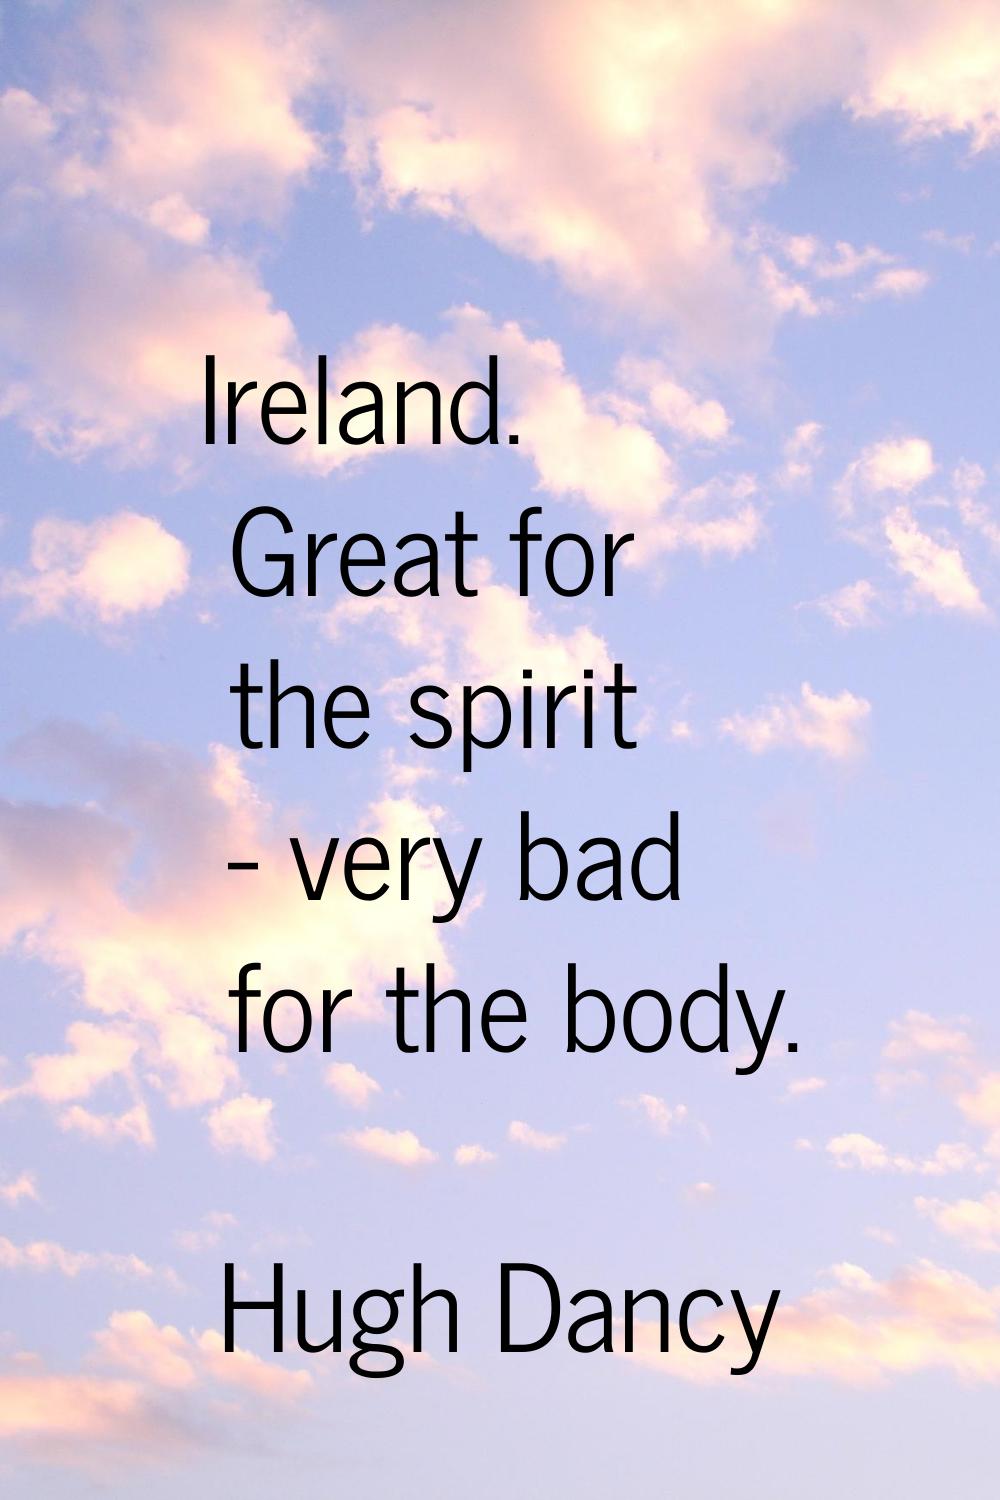 Ireland. Great for the spirit - very bad for the body.